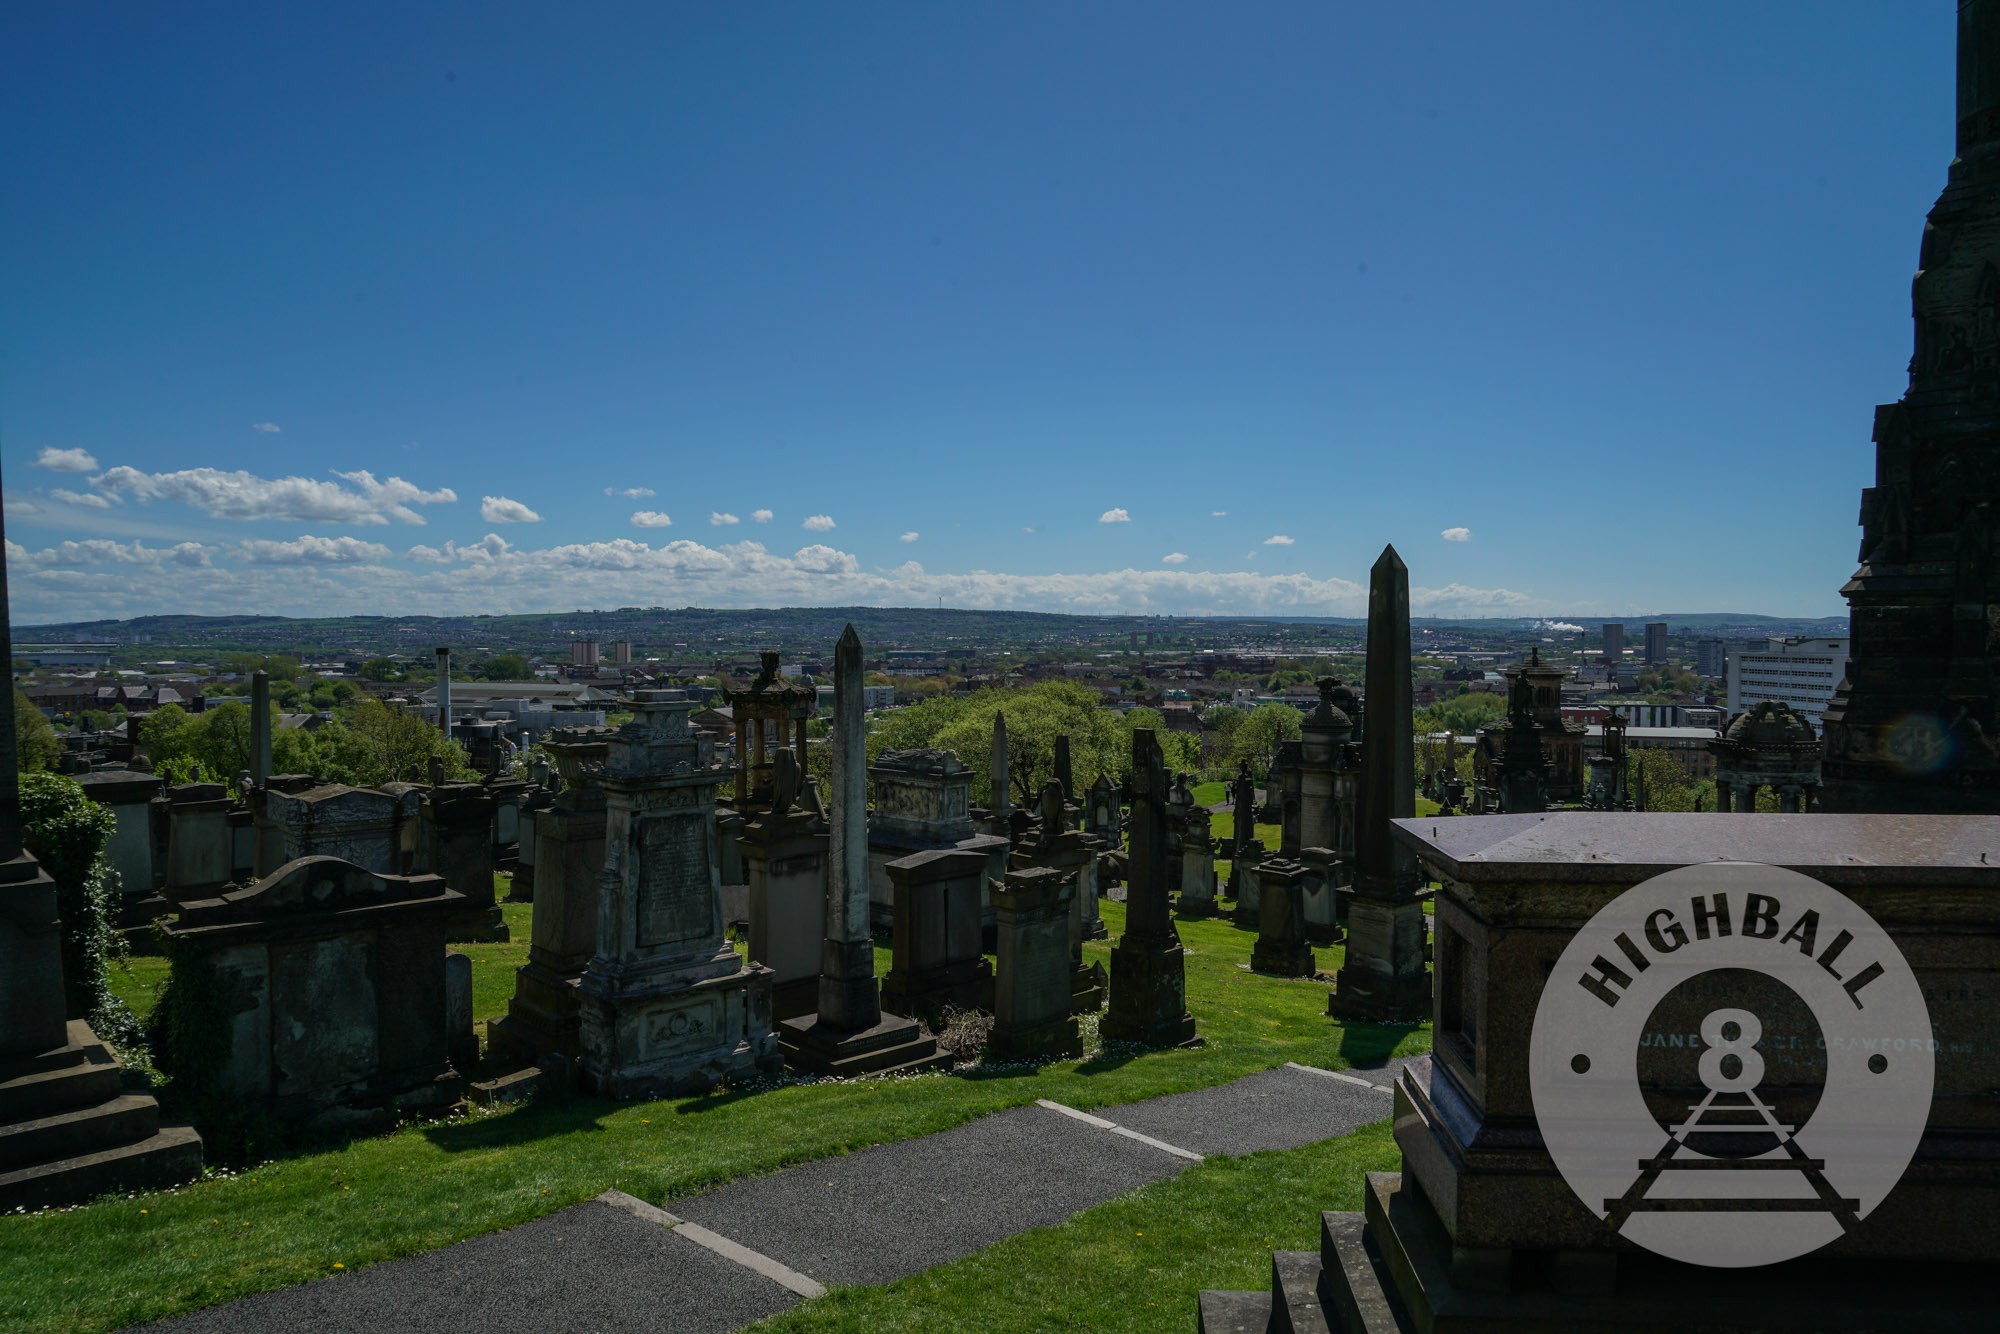 Looking south over the city from the Glasgow Necropolis, Glasgow, Scotland, UK, 2018.